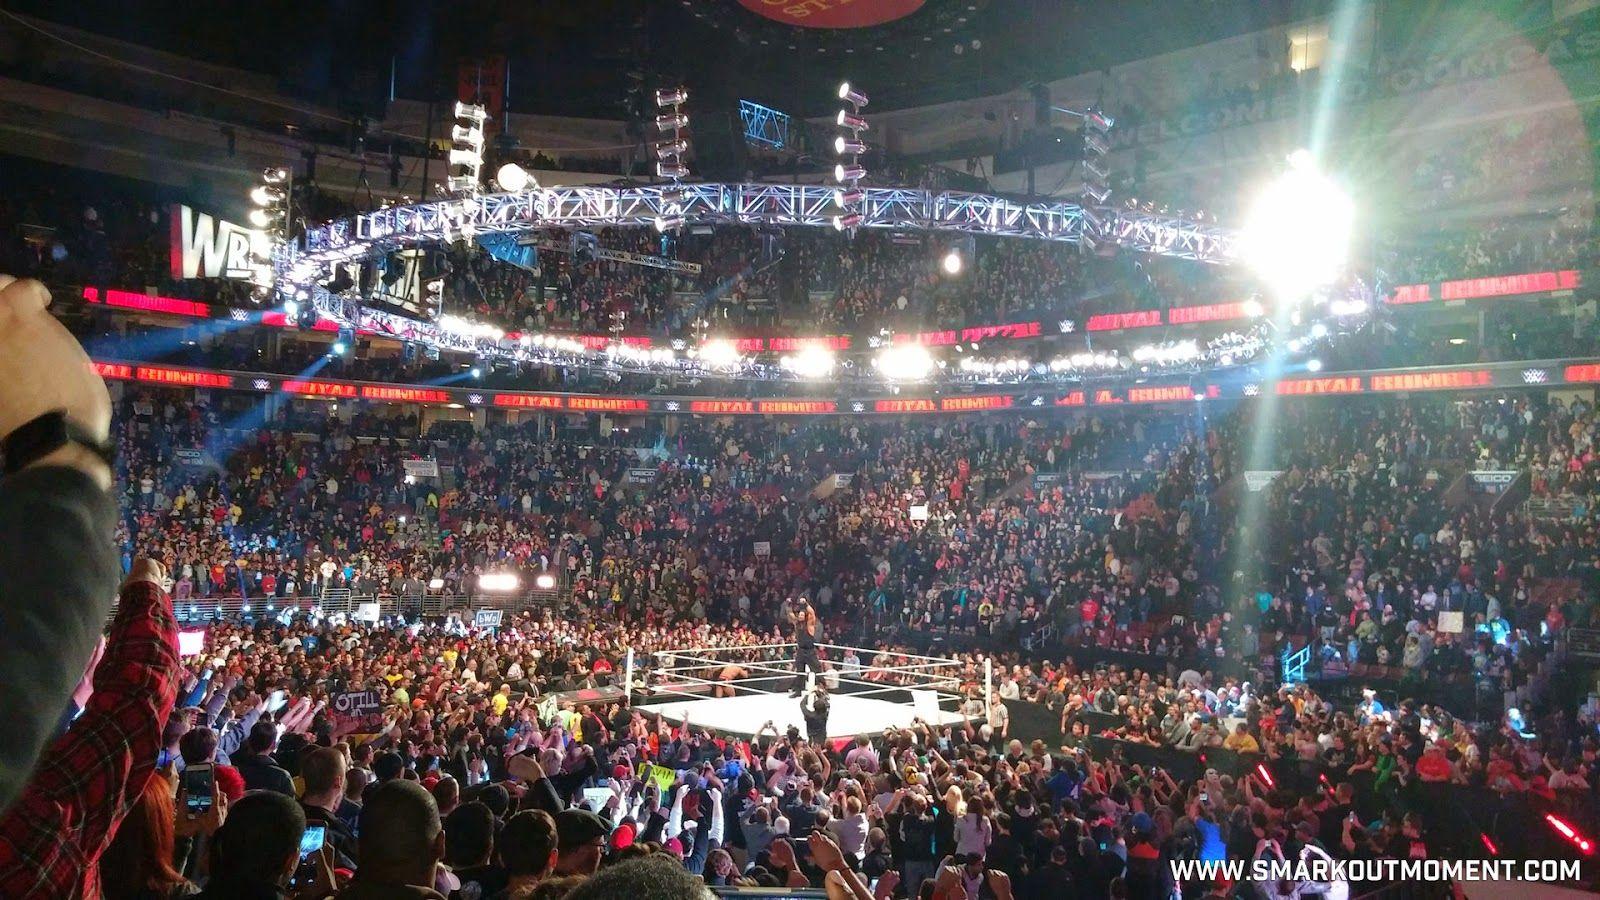 WWE Royal Rumble 2015 Crowd Photo & Arena Picture. Smark Out Moment